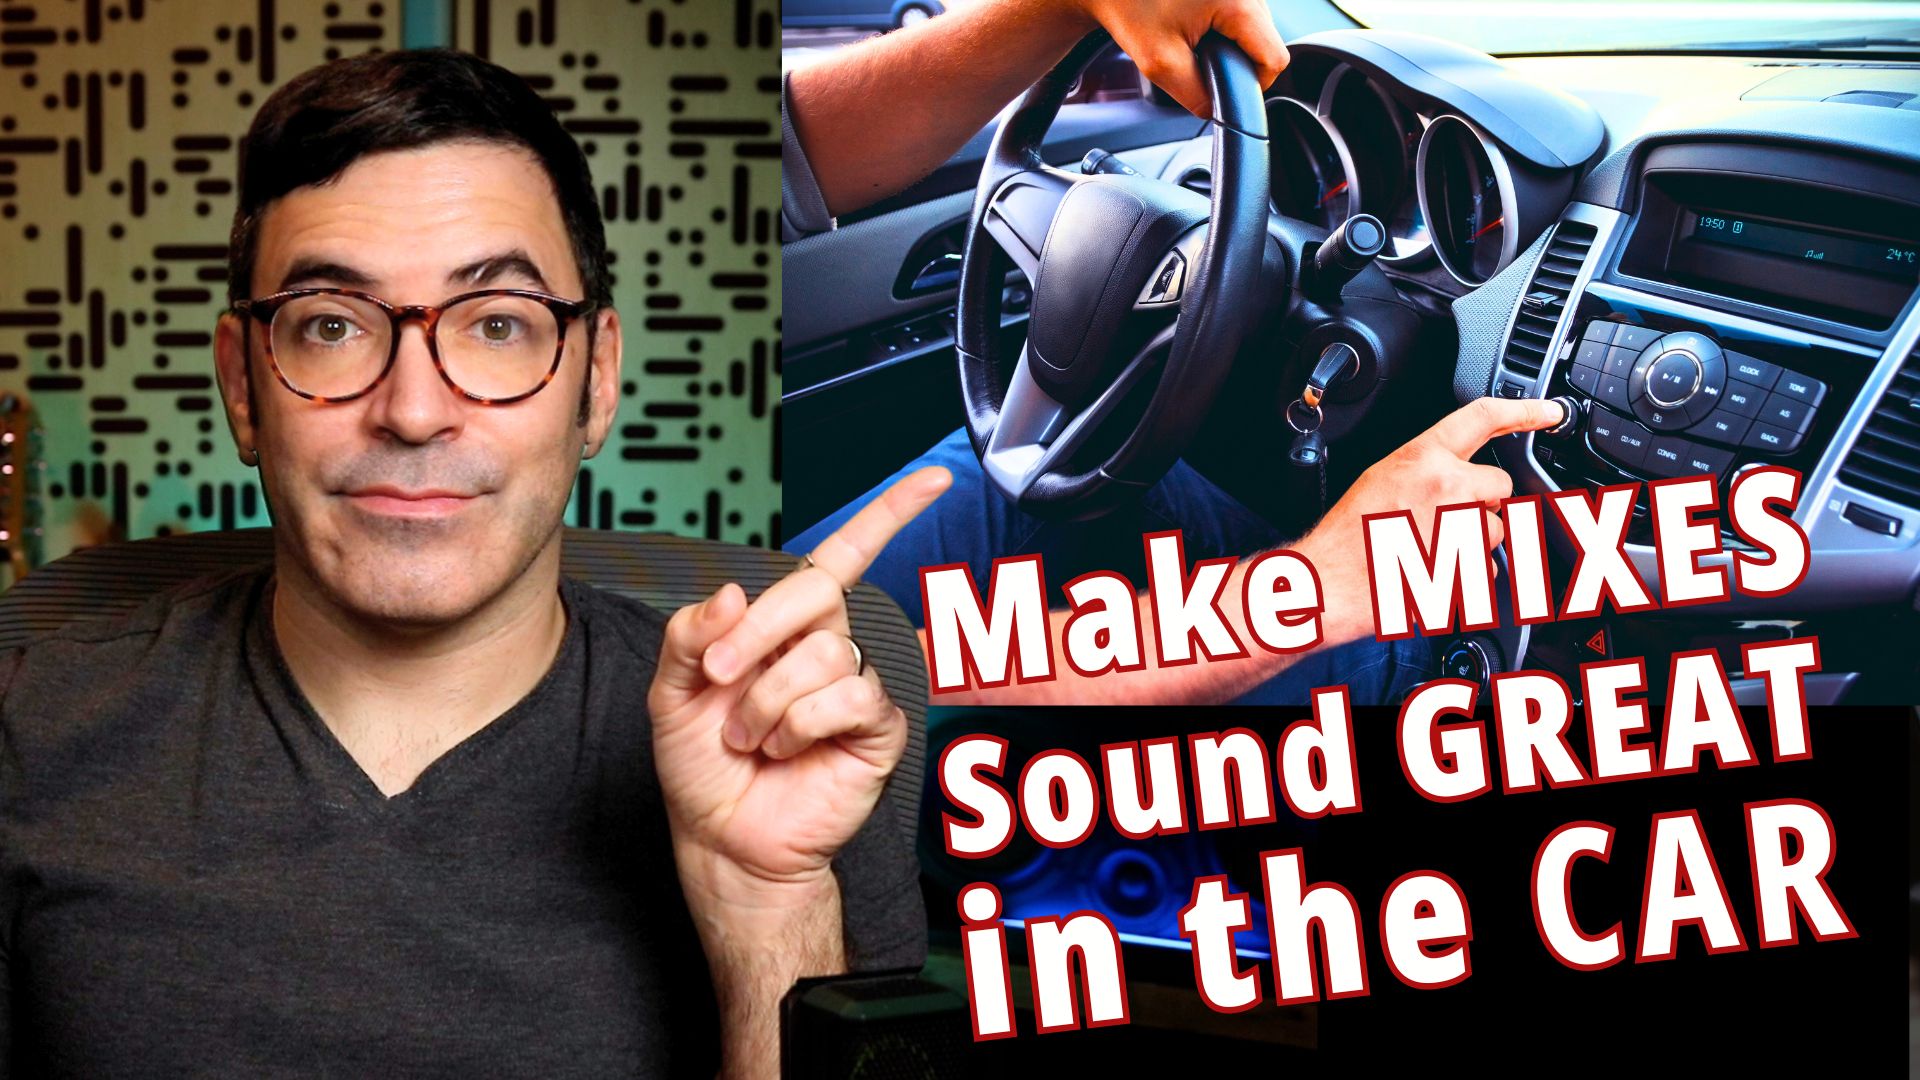 Mastering the Car Check: How to Get Great Mixes Everywhere